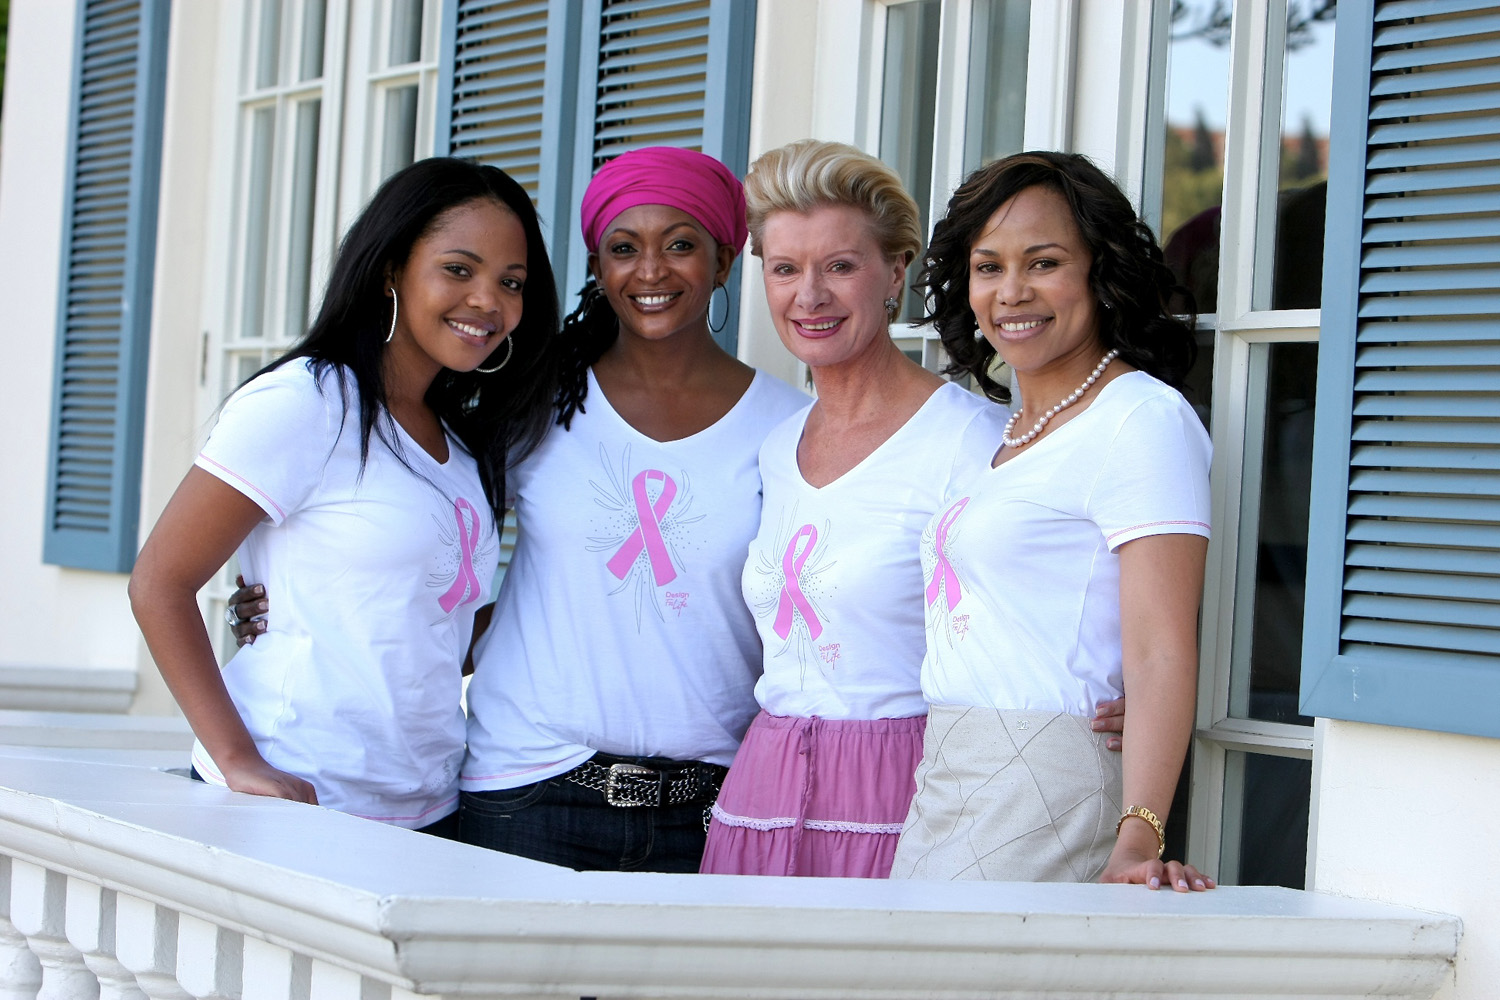 Top South African Designer Joins Breast Cancer Fight